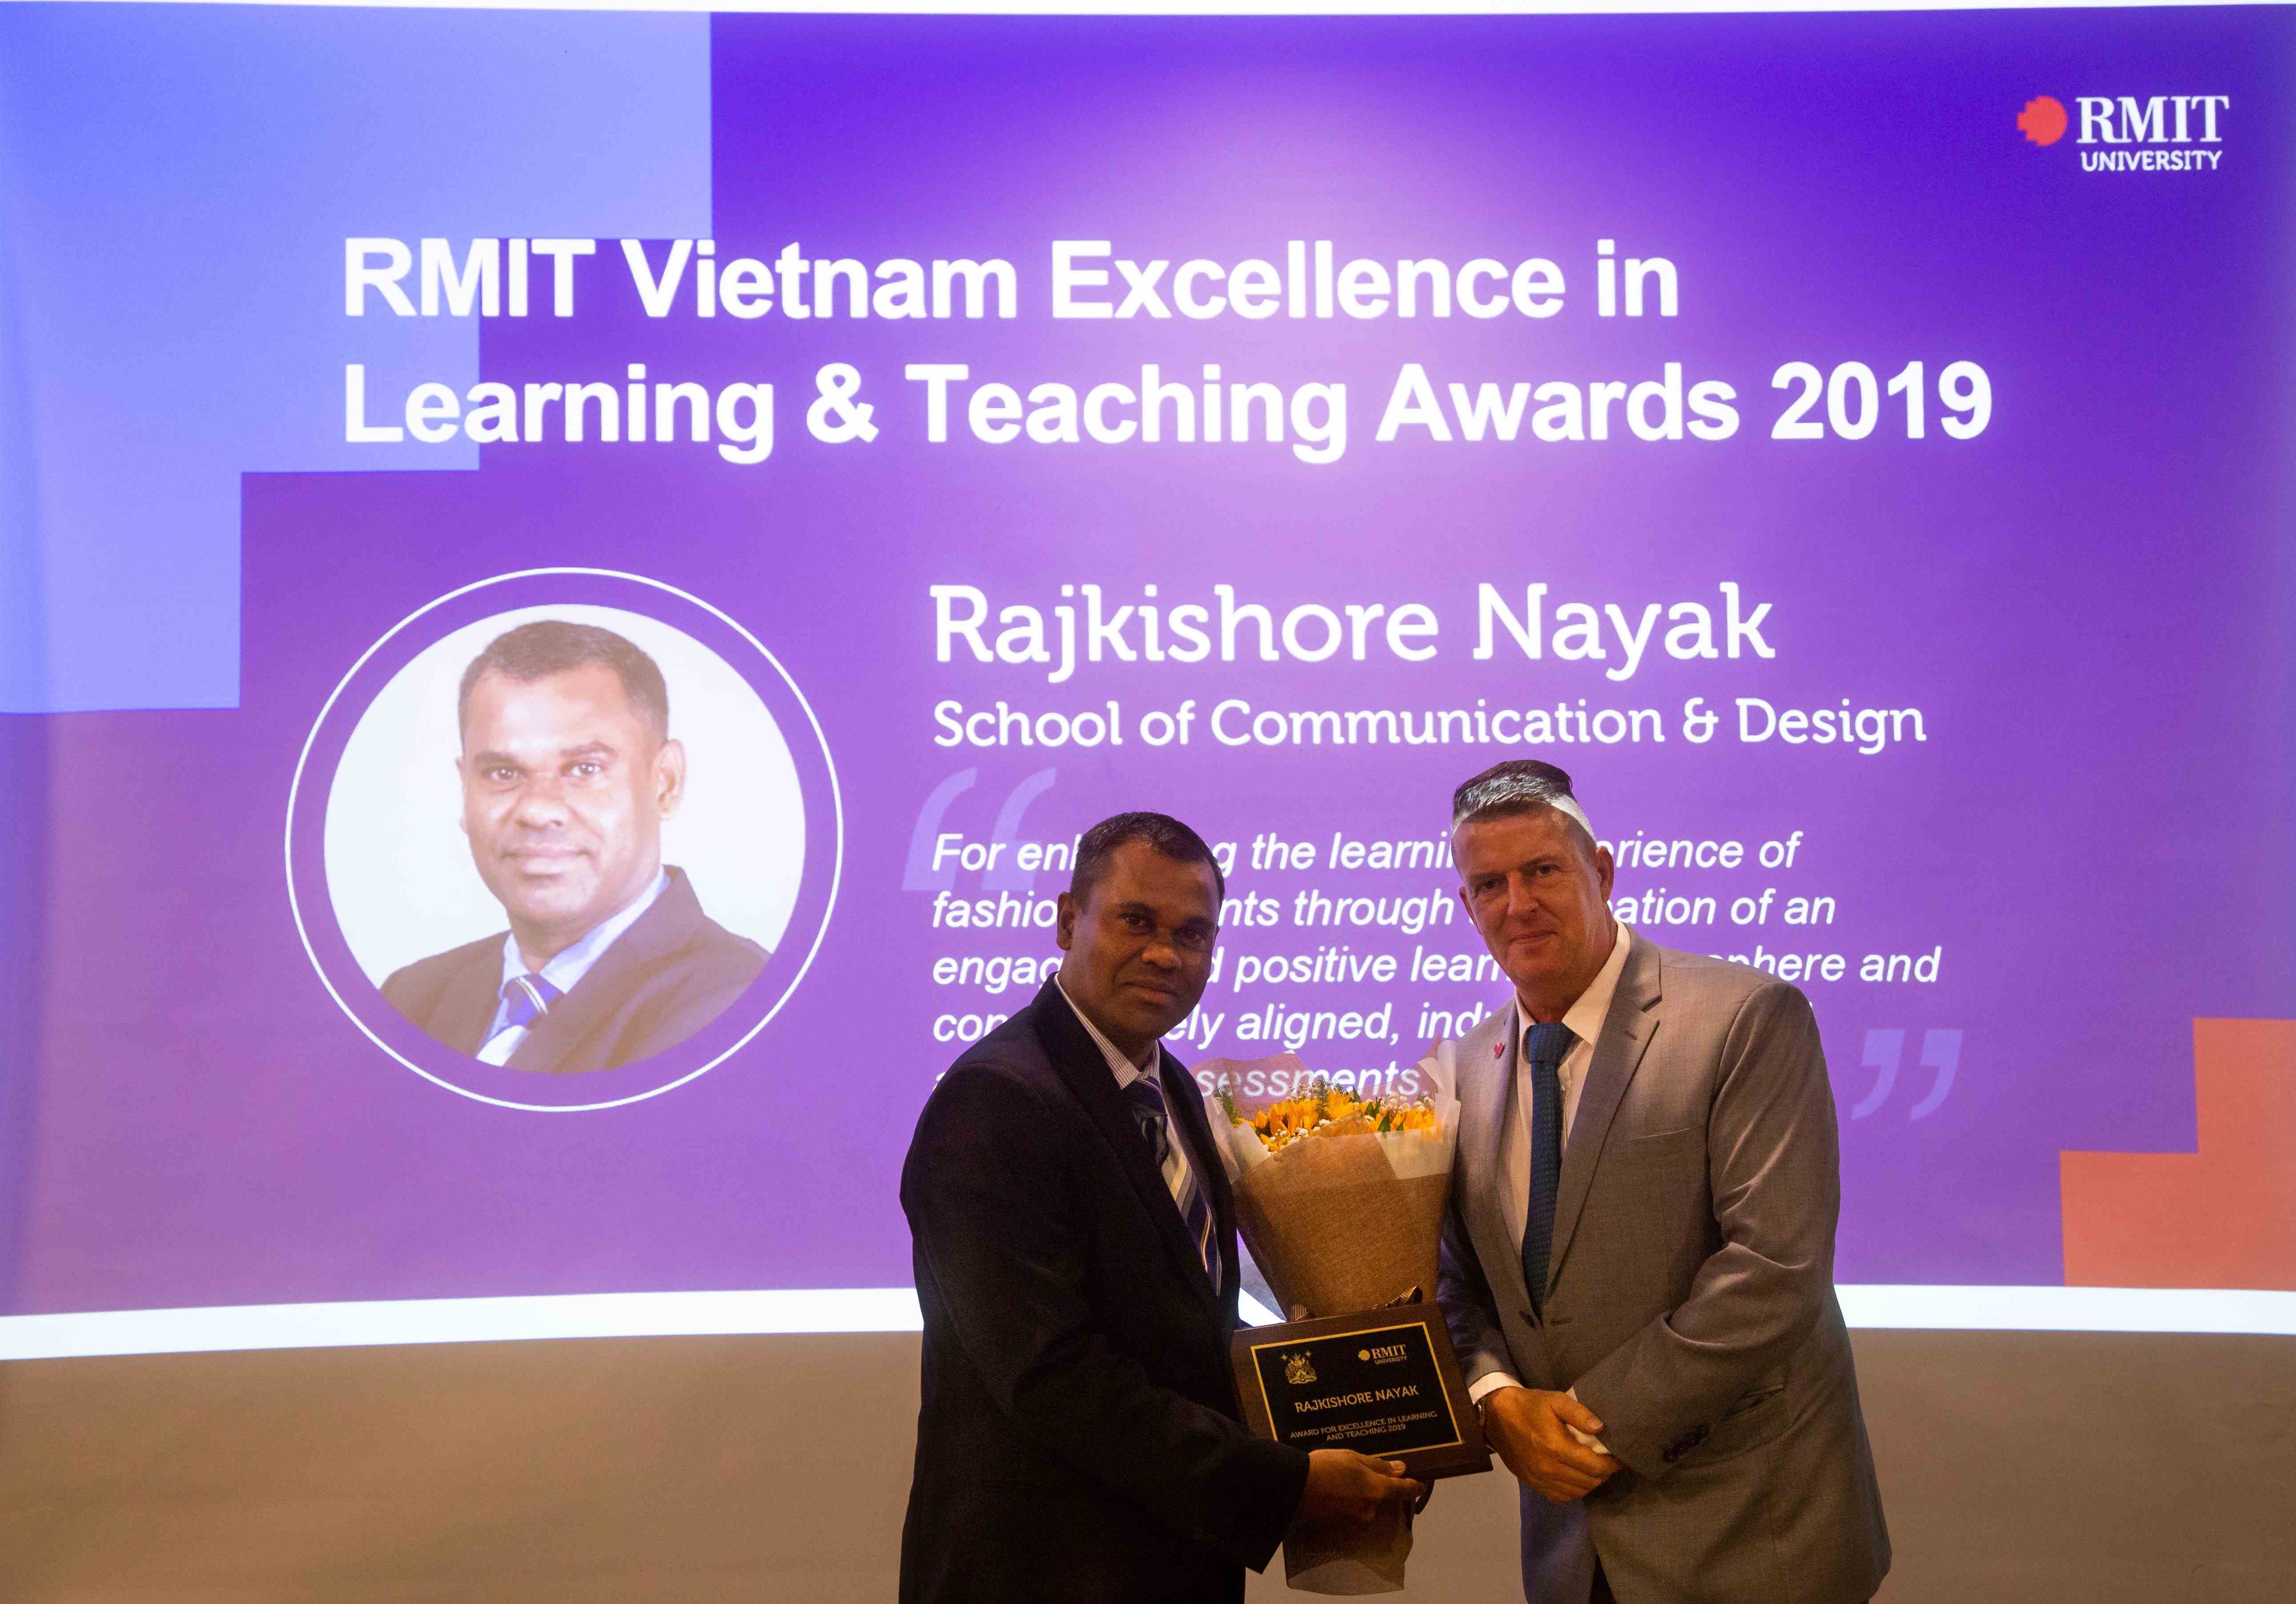 Dr Rajkishore Nayak, Fashion Merchandising Senior Lecturer from the School of Communication & Design, received the Outstanding Contributions to Student Learning award for his significant impact on student learning through his enthusiastic and professional approach, strong engagement with industry and use of authentic assessment. 